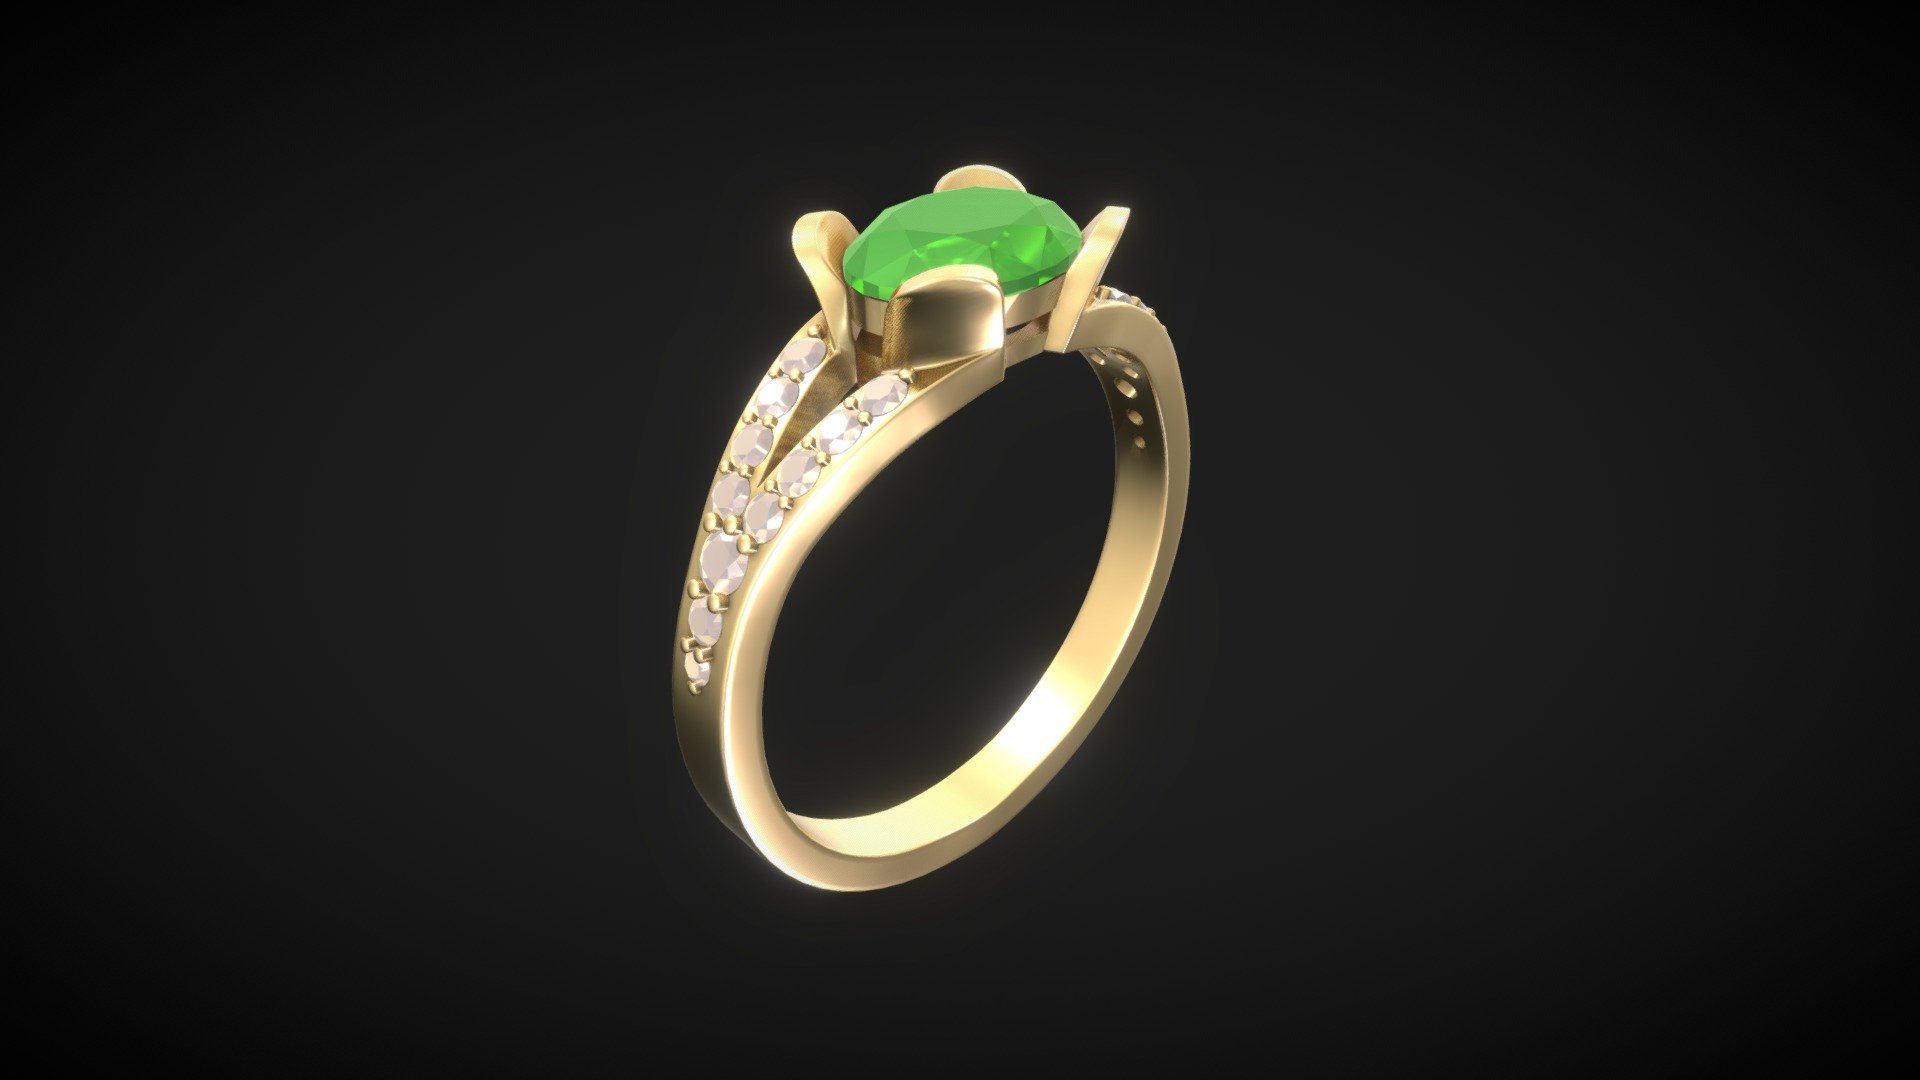 [Full presentation] : https://www.behance.net/gallery/169829553/Ready-to-3D-print-Golden-ring-with-emerald-gem

Model of Elegant gold ring with emerald stone and little diamonds. 
It is READY TO PRINT* model so after buy, You can download file without stones and use it for make mold.

Main stone: 8mm x 6mm OVAL ||
Side stones (4x on 2 branch) : 1.5mm ROUND||
Side 3rd stone: 2mm ROUND||
Side 2nd stone: 1.5mm ROUND||
Side 1st stone: 1.2mm ROUND||

Made in Blender 3.4, the model was created in collab with a goldsmith.

[NOTE]*: .stl &amp; .blend  file with and without stones/cutters attached in additional files 3d model